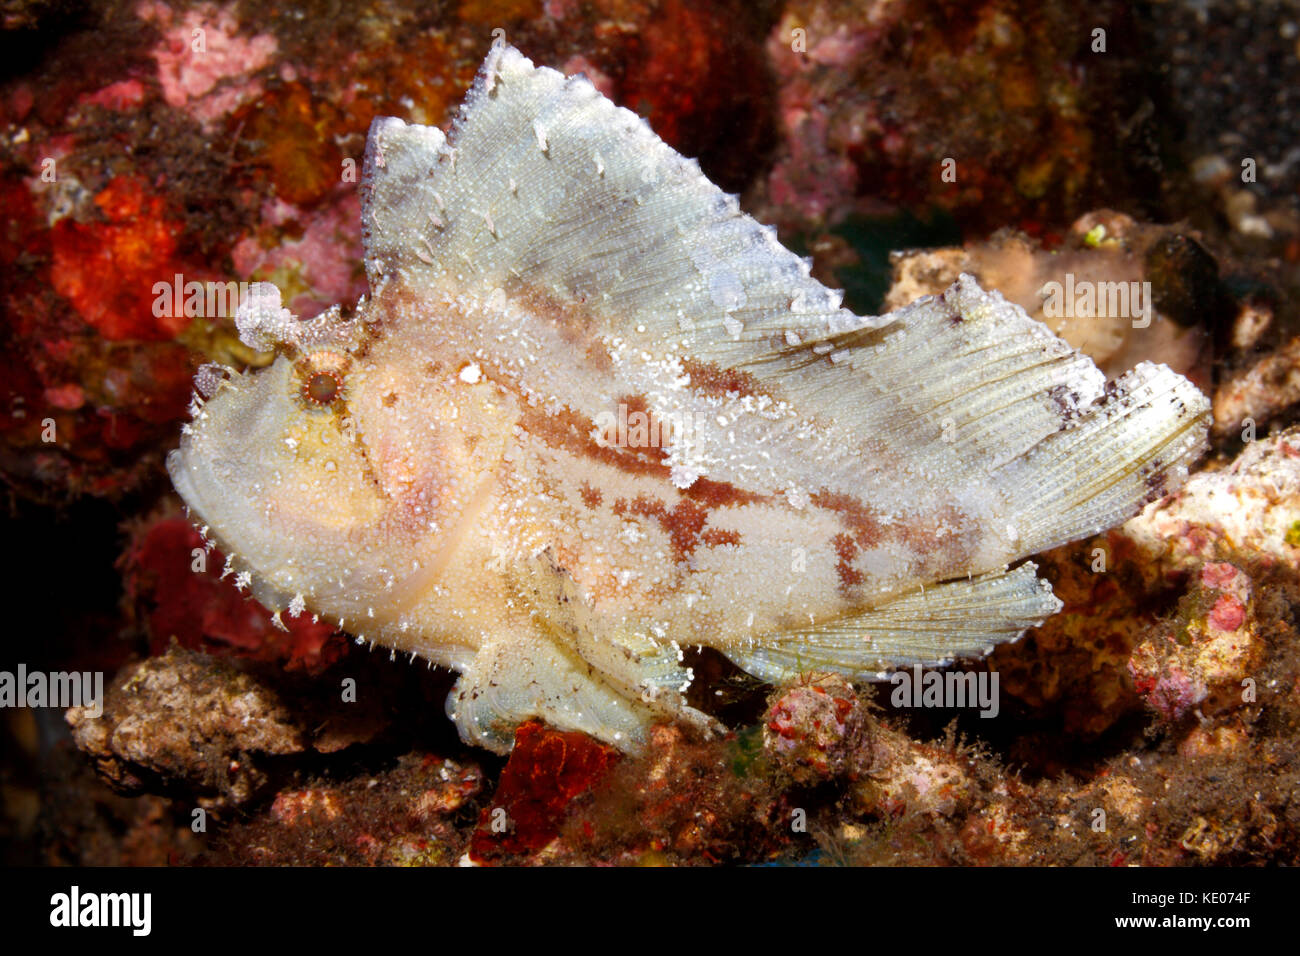 Leaf Scorpionfish, Taenianotus triacanthus, white variation. Also known as a Paperfish and Paper Scorpionfish. Tulamben, Bali, Indonesia. Stock Photo